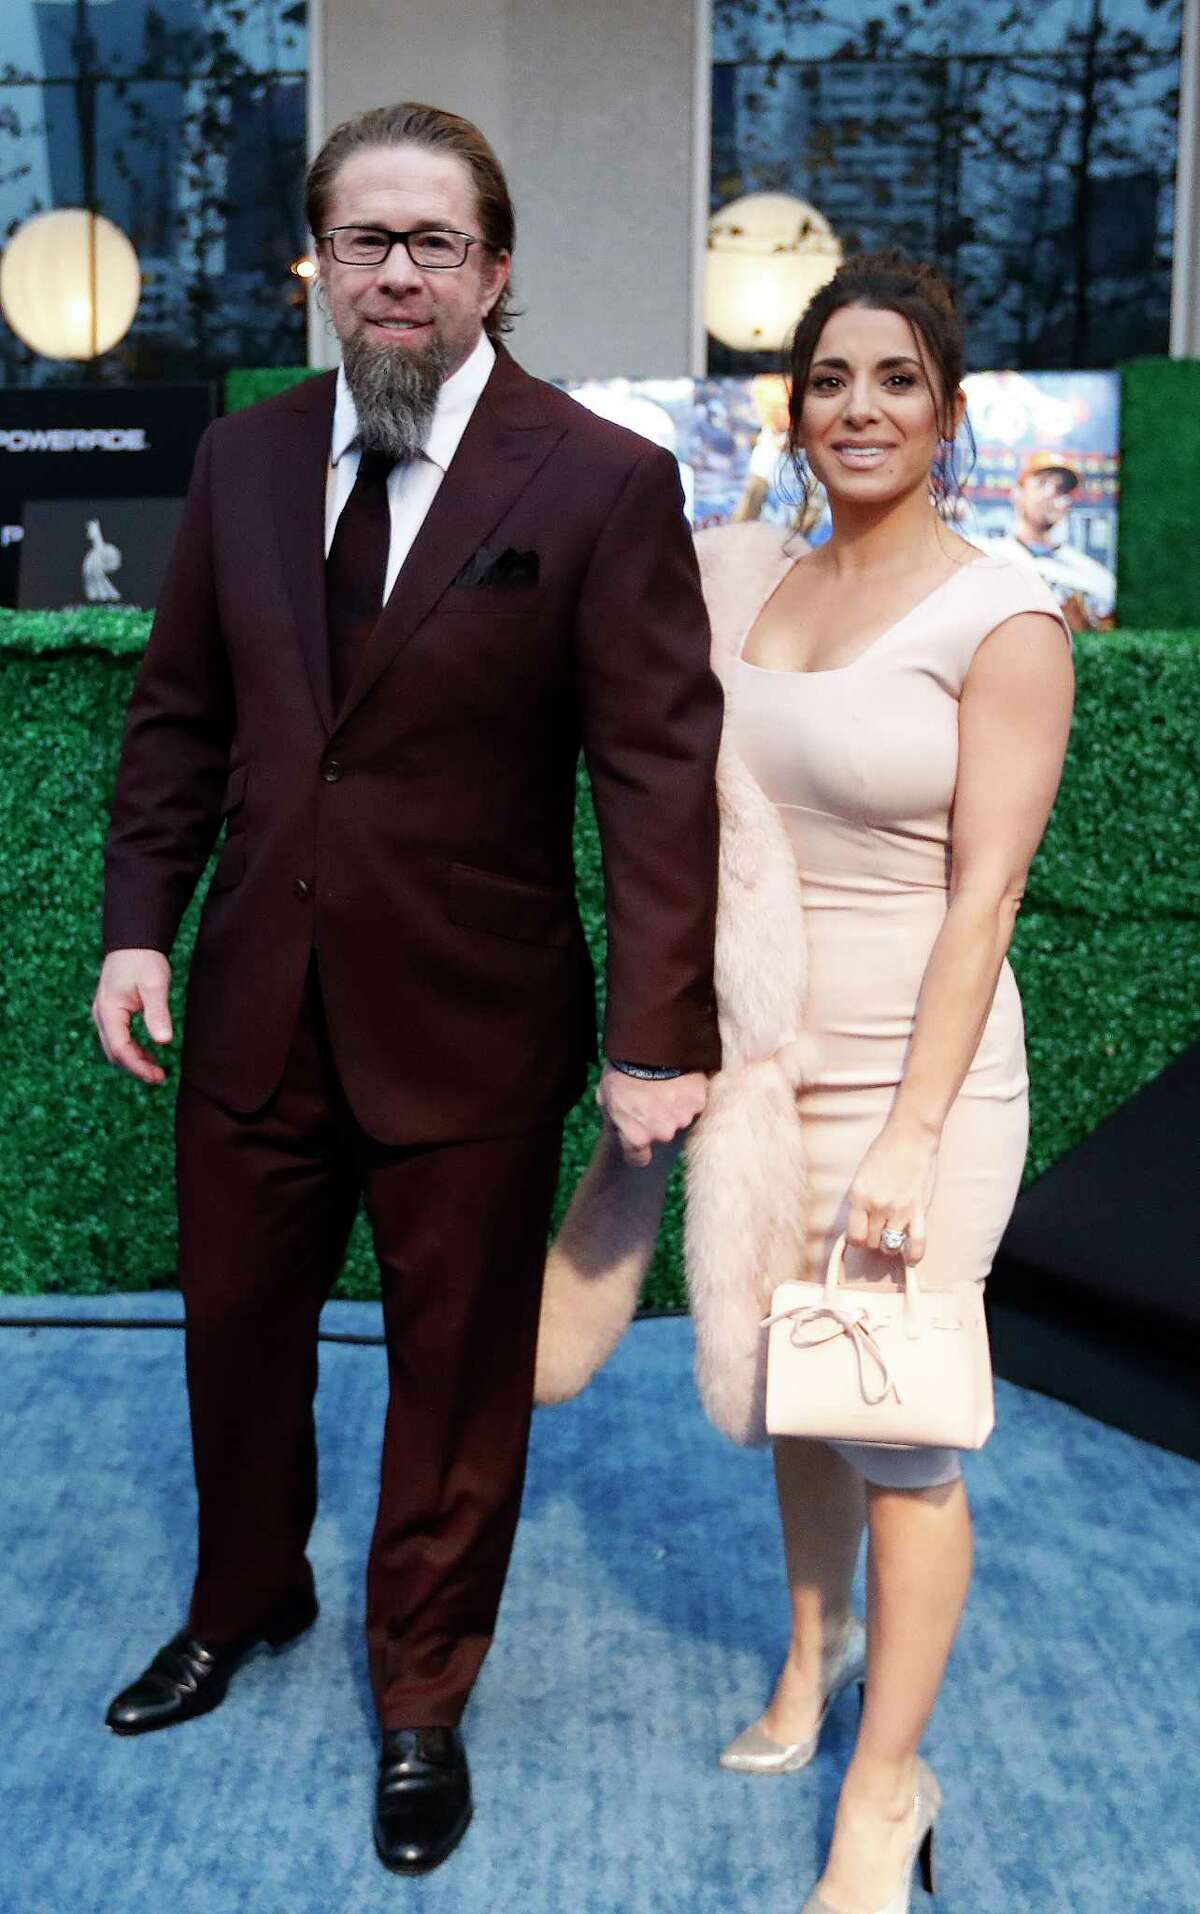 Hall of Famer and former Houston Astros first baseman Jeff Bagwell and his wife, Rachel, on the blue carpet before the start of the Houston Sports Awards at the Hilton Americas, Thursday, Feb. 8, 2018, in Houston.